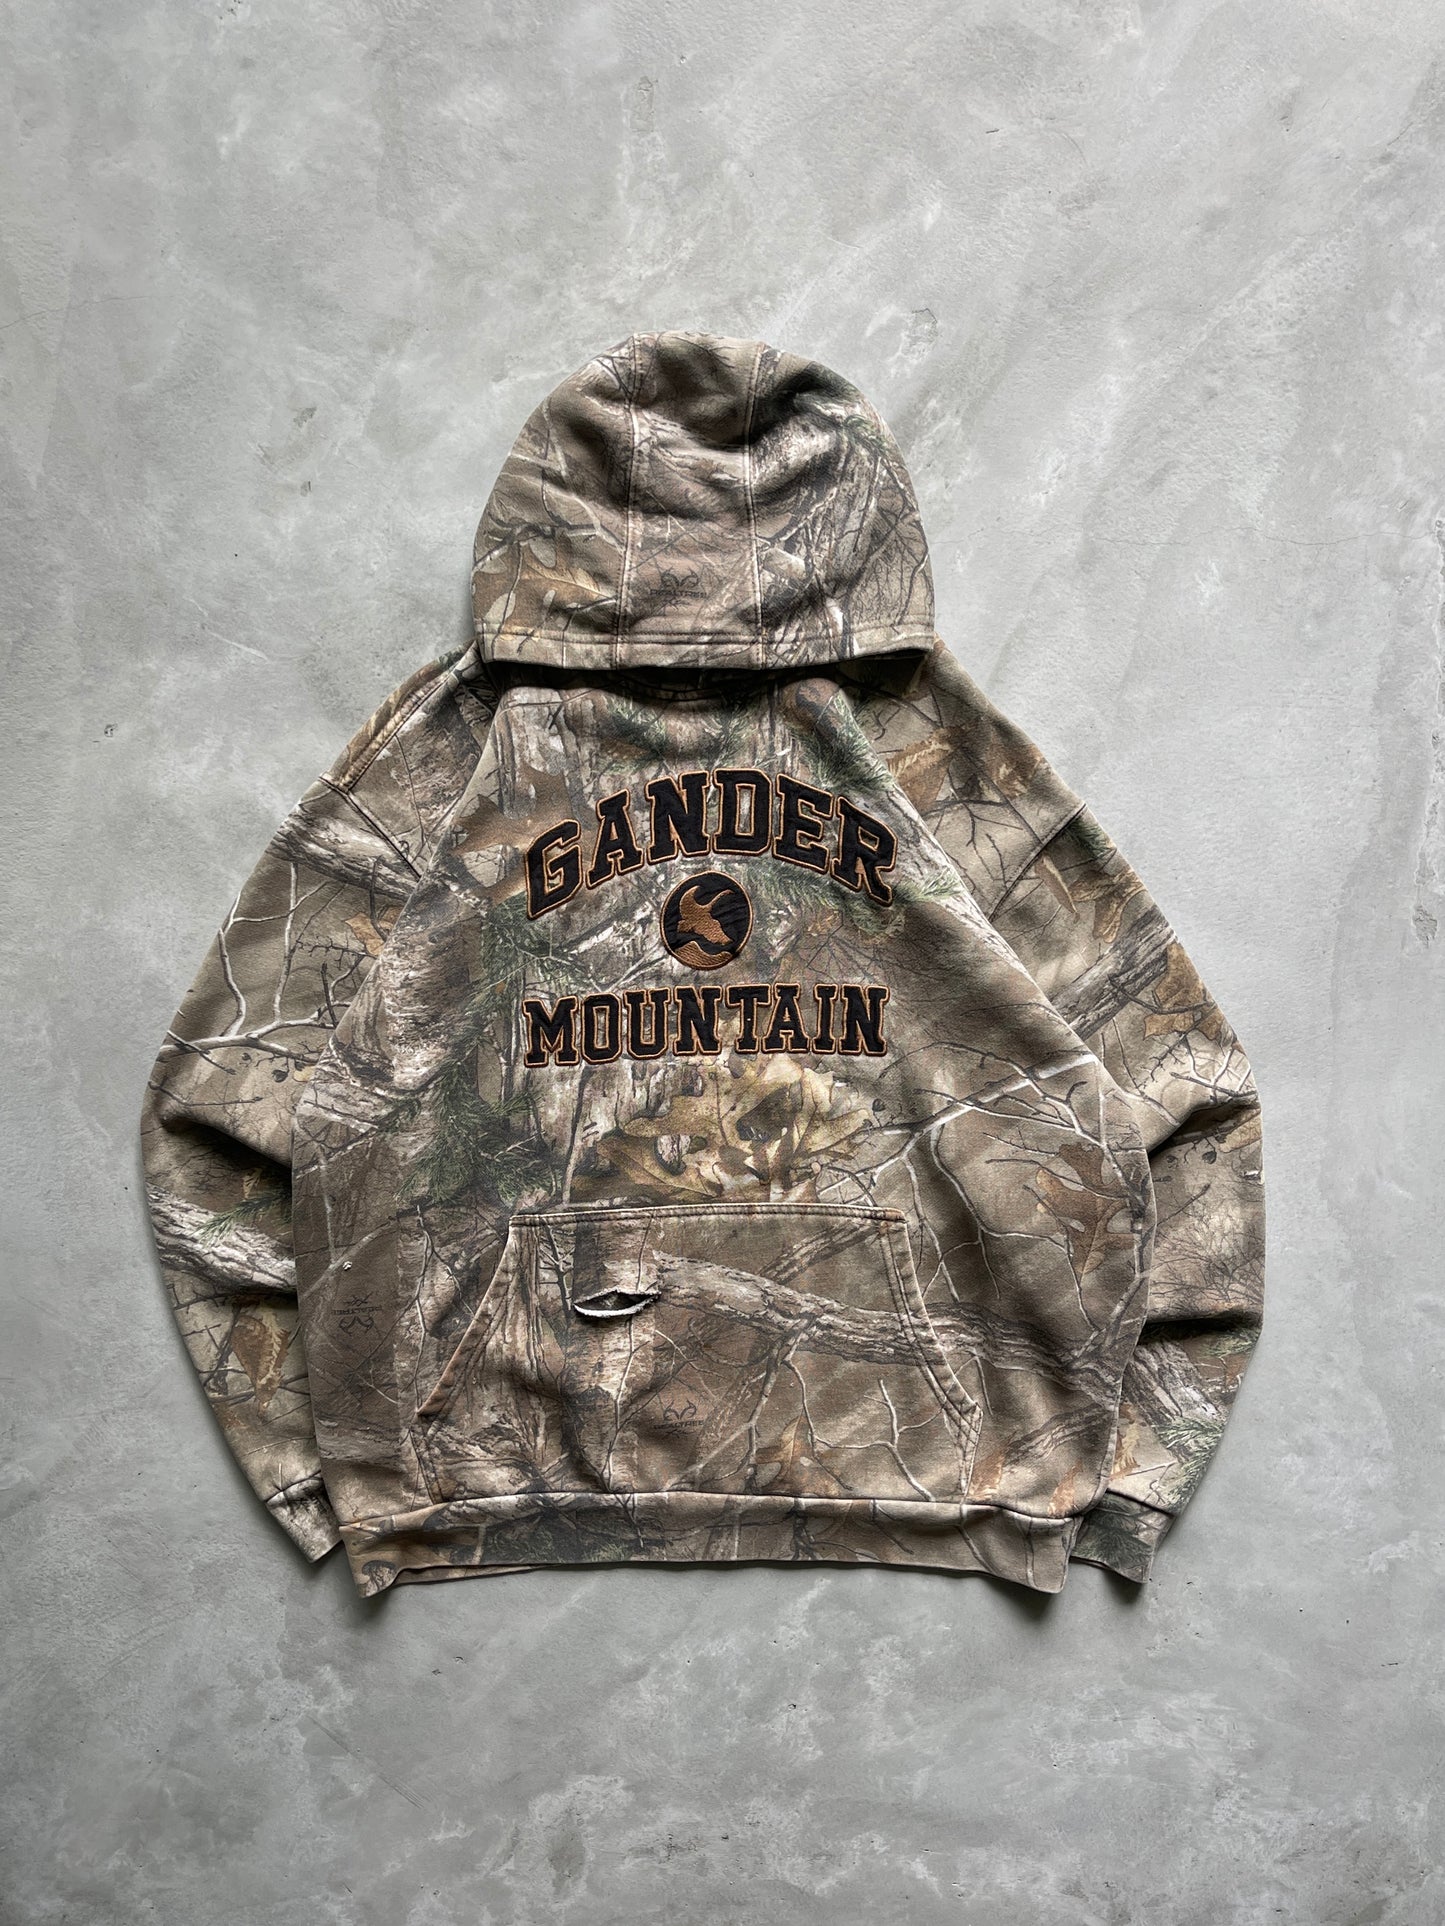 Gander Mountain Forest Camouflage Hoodie - 2000s - L